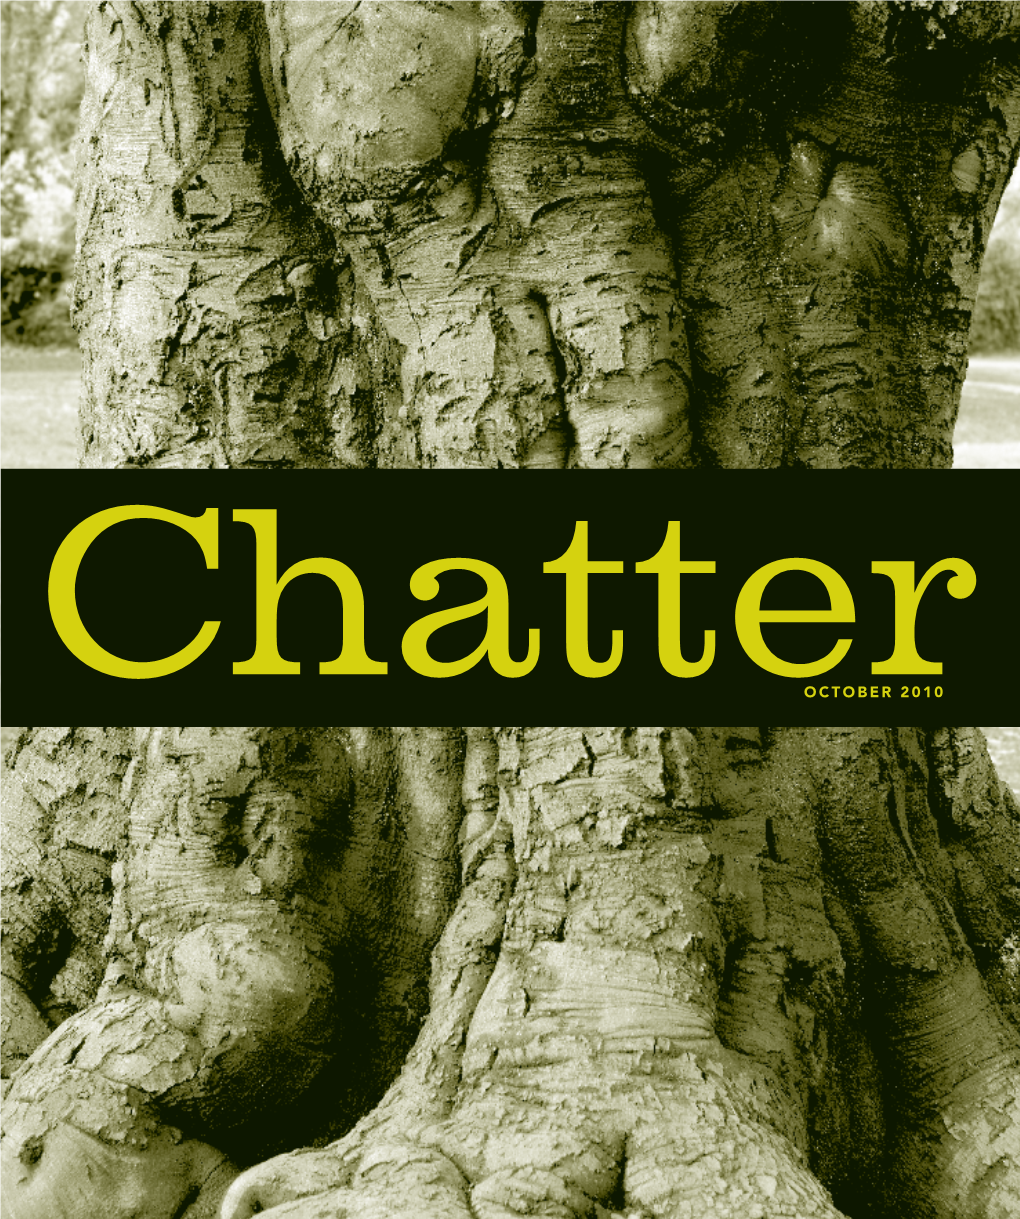 OCTOBER 2010 a Letter from Chatter